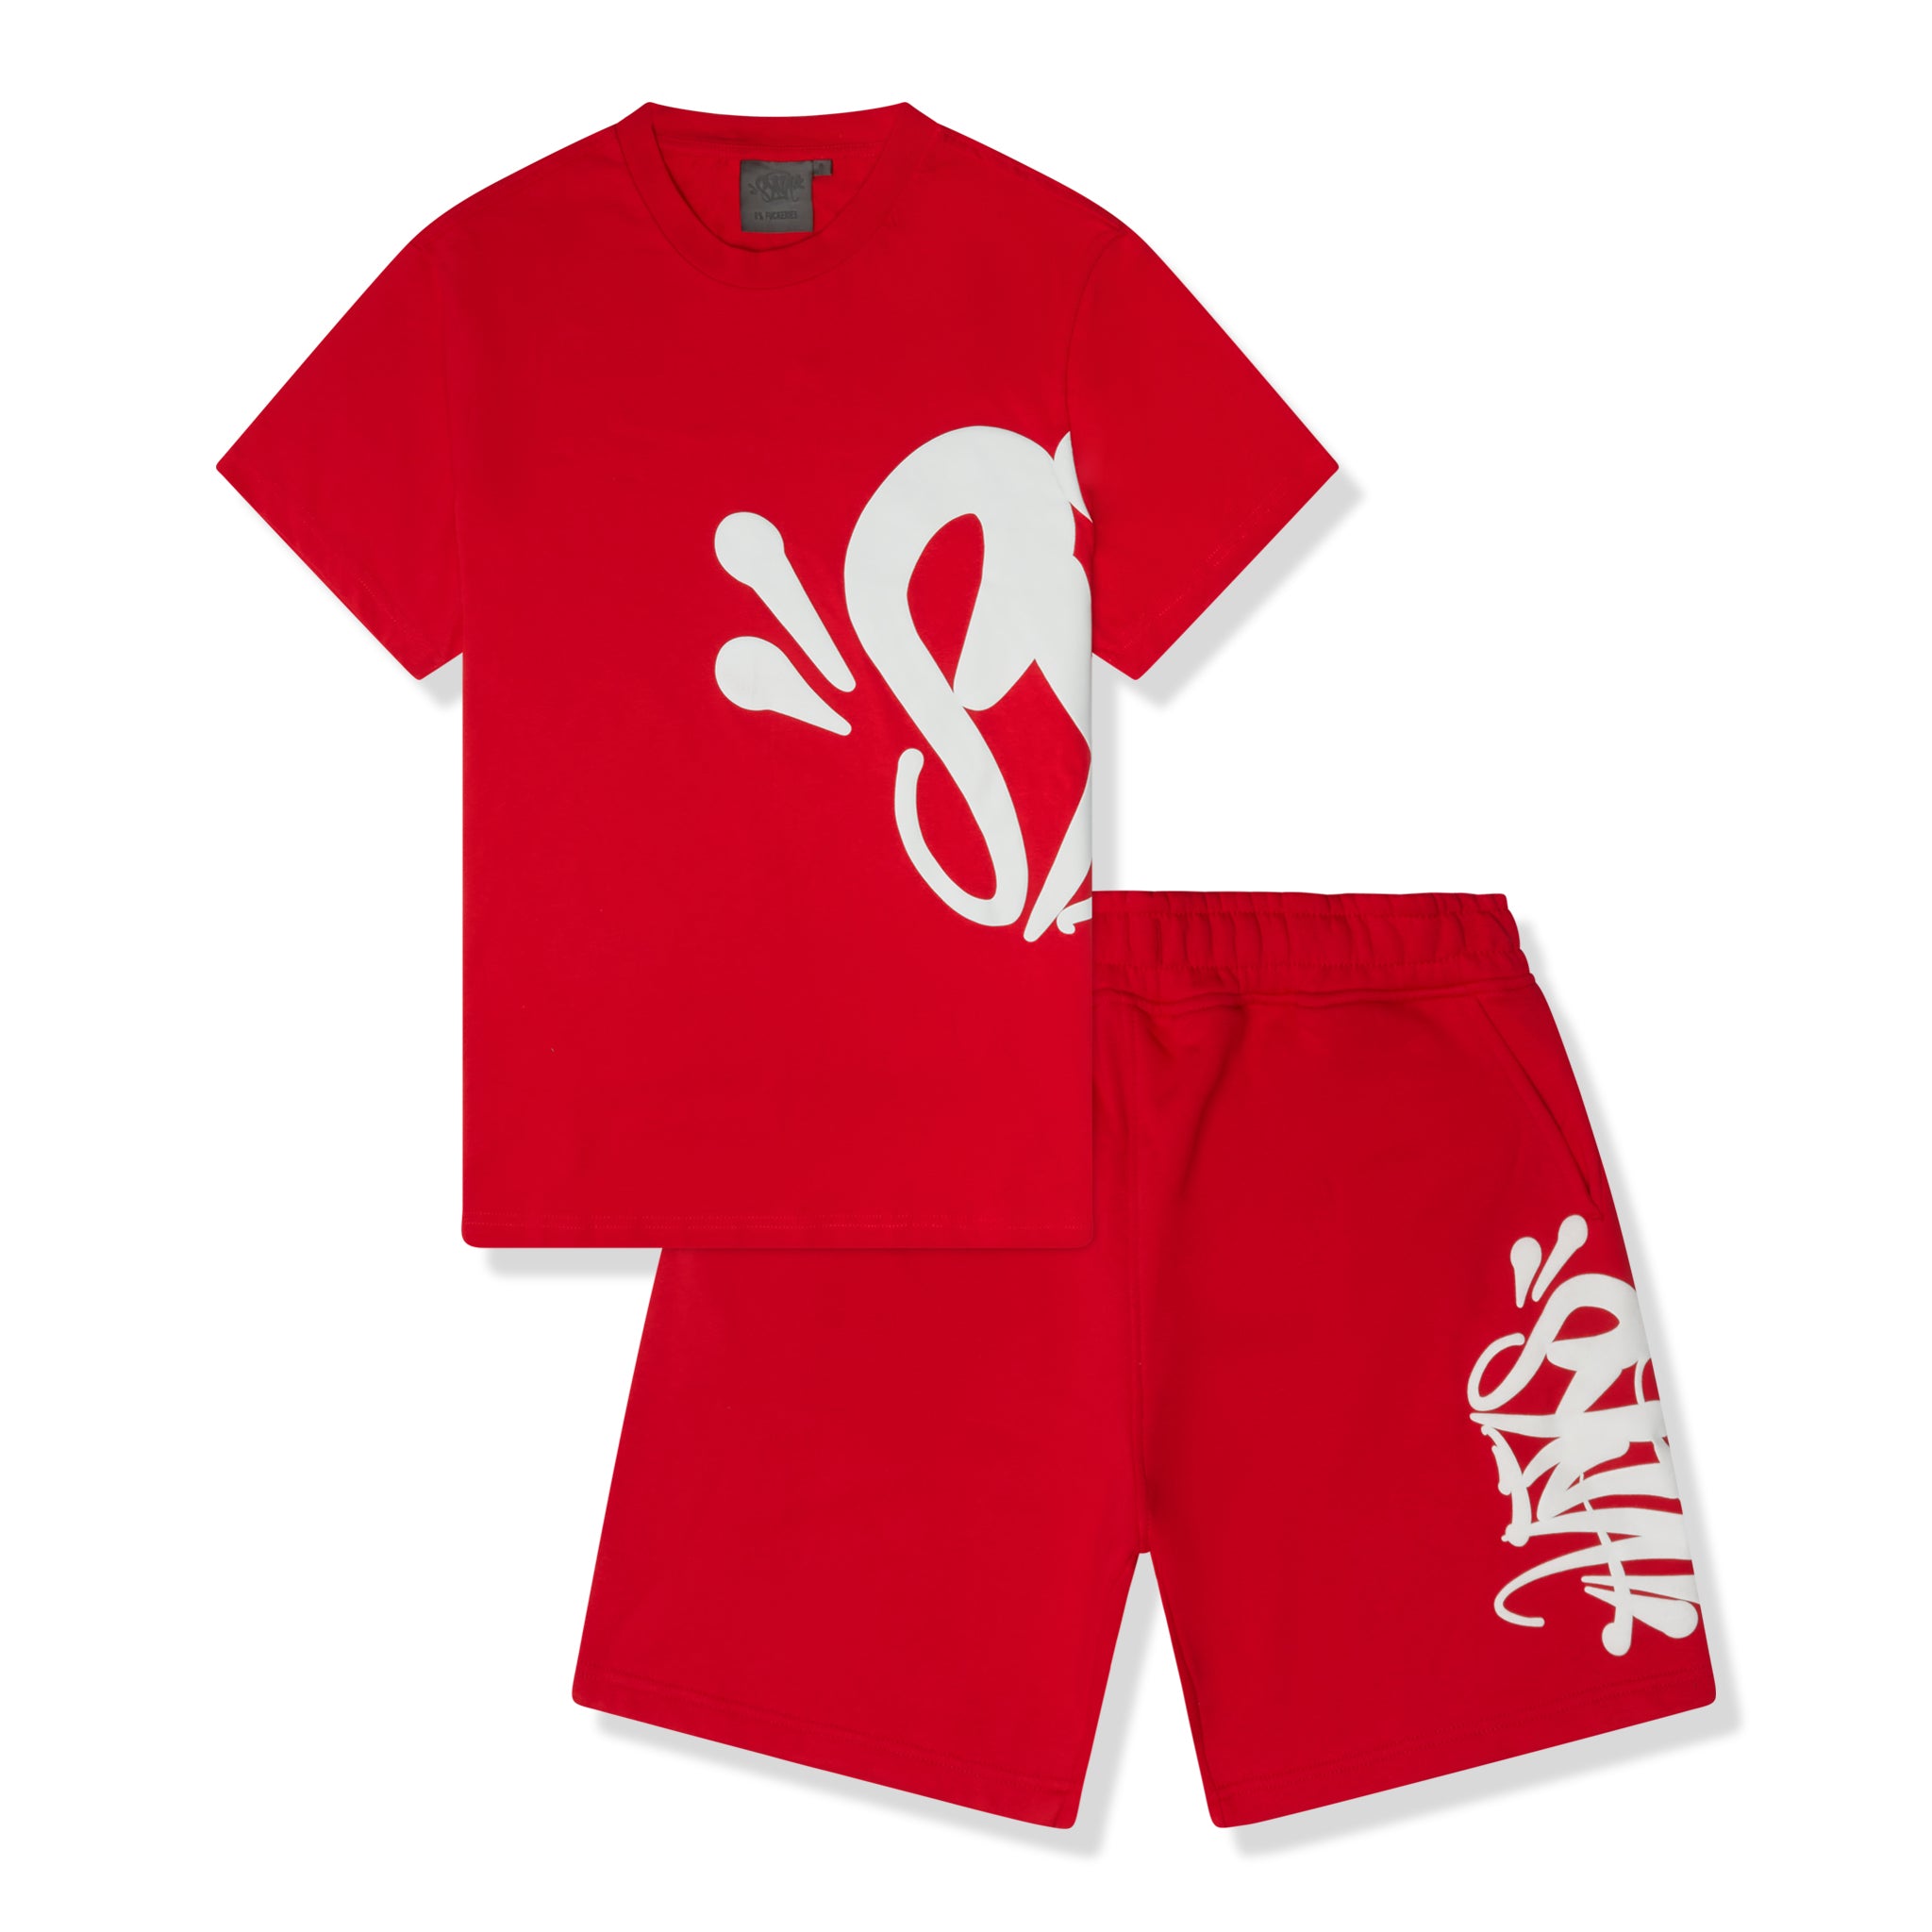 Syna World Team Syna Twinset Red T-Shirt & Shorts – Cheap